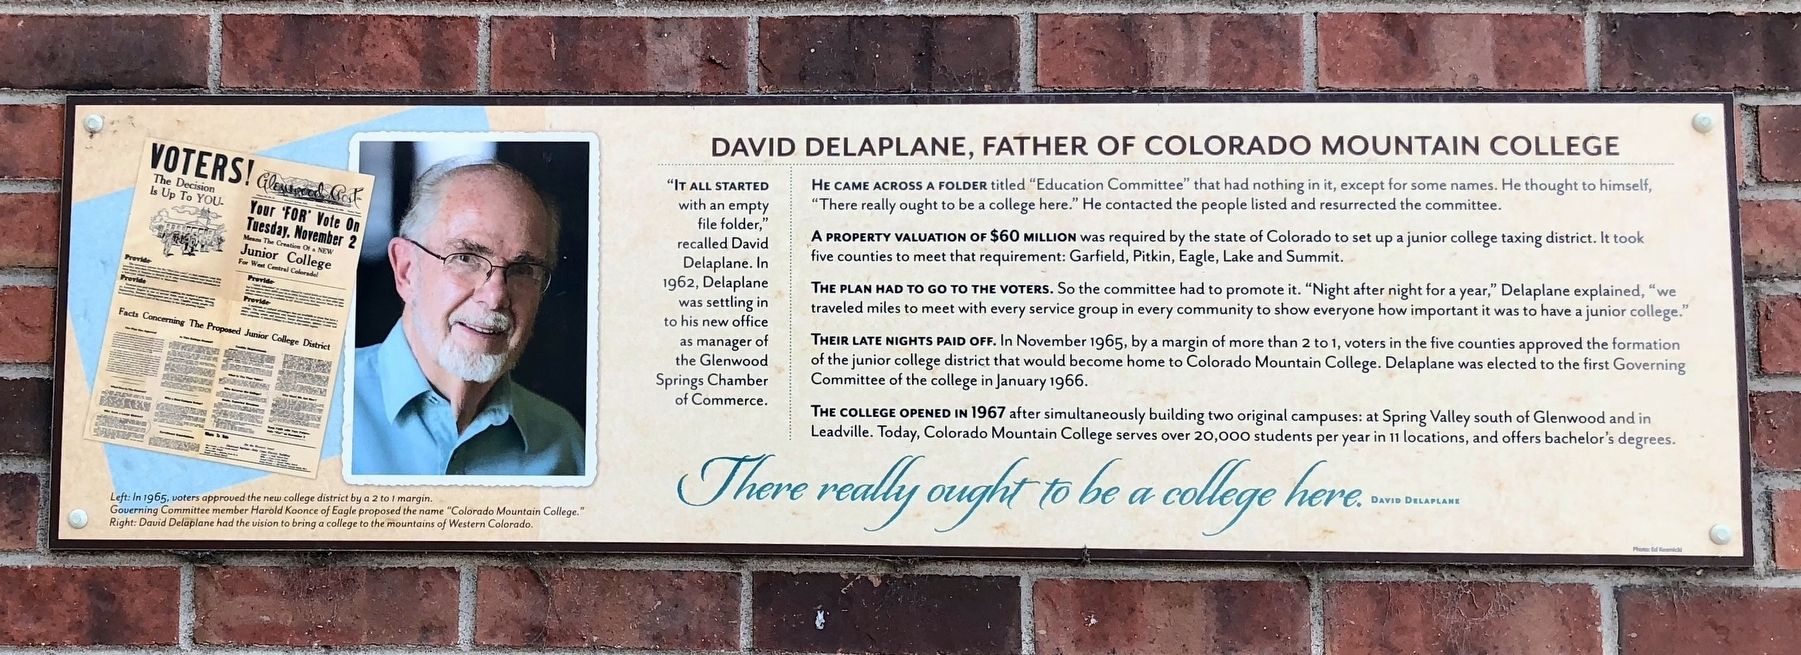 David Delaplane, Father of Colorado Mountain College Marker image. Click for full size.